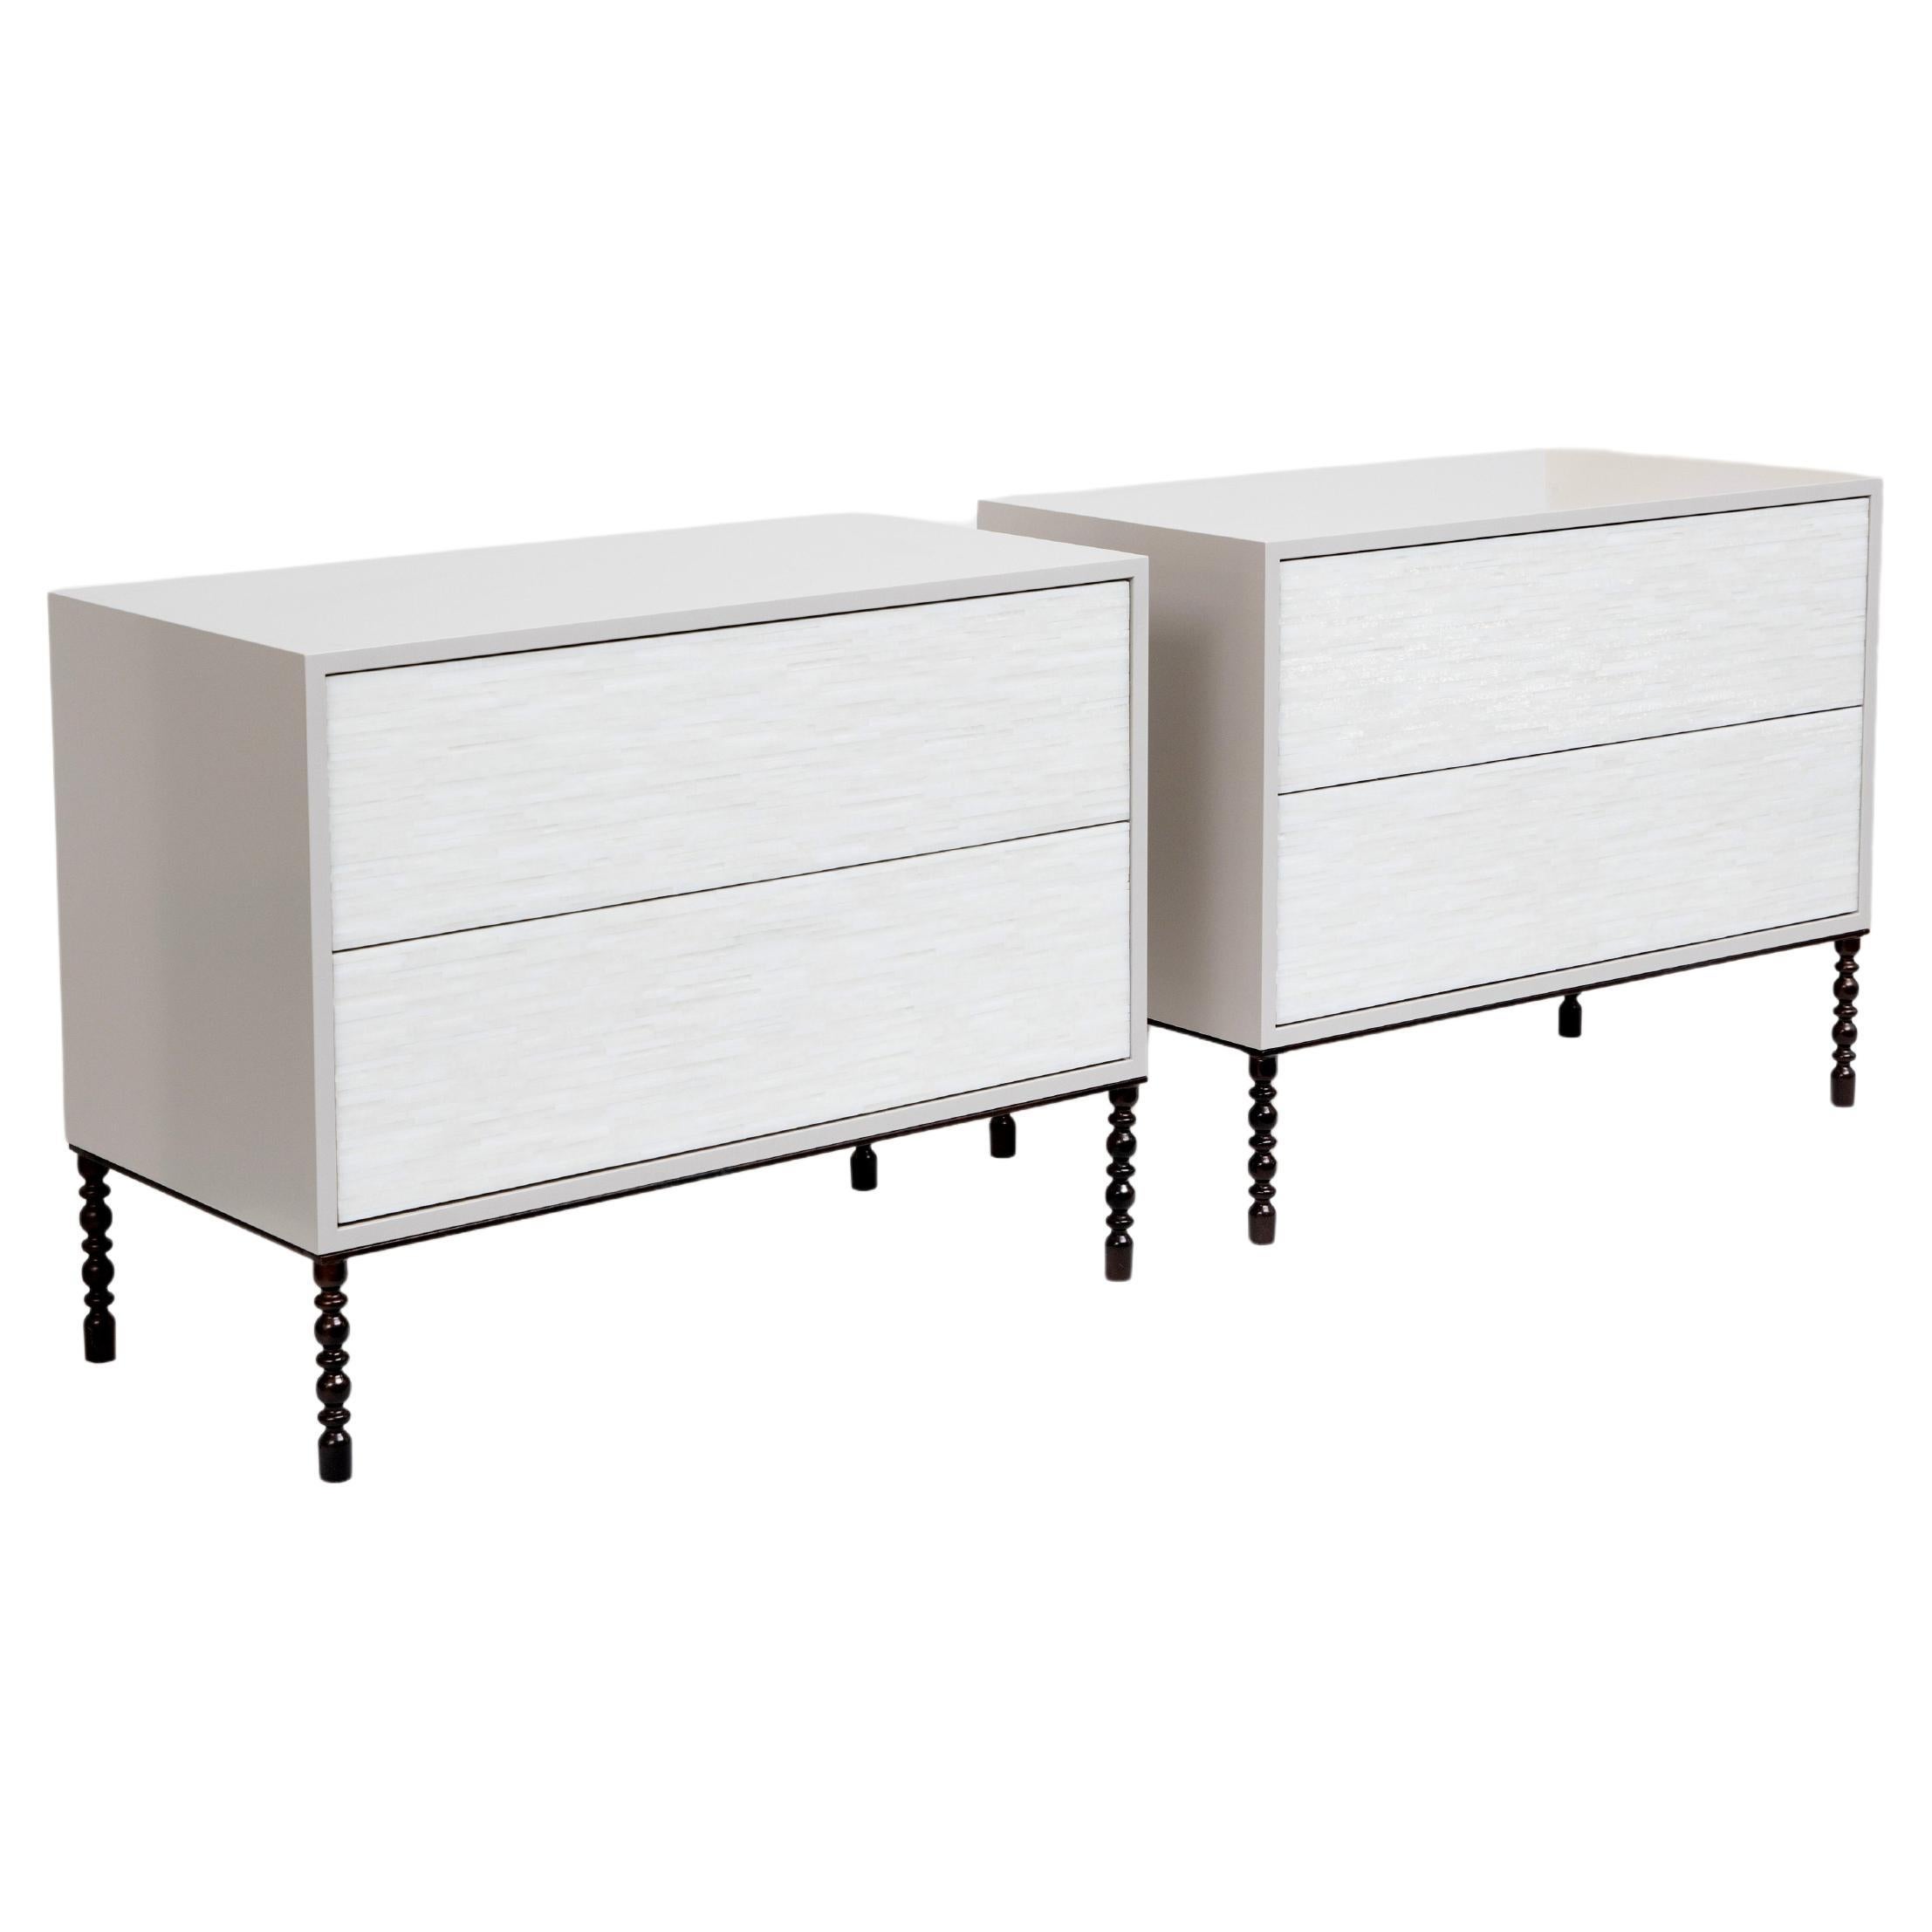 Modern 2-Drawer Glass Mosaic Nightstands With Metal base by Ercole Home